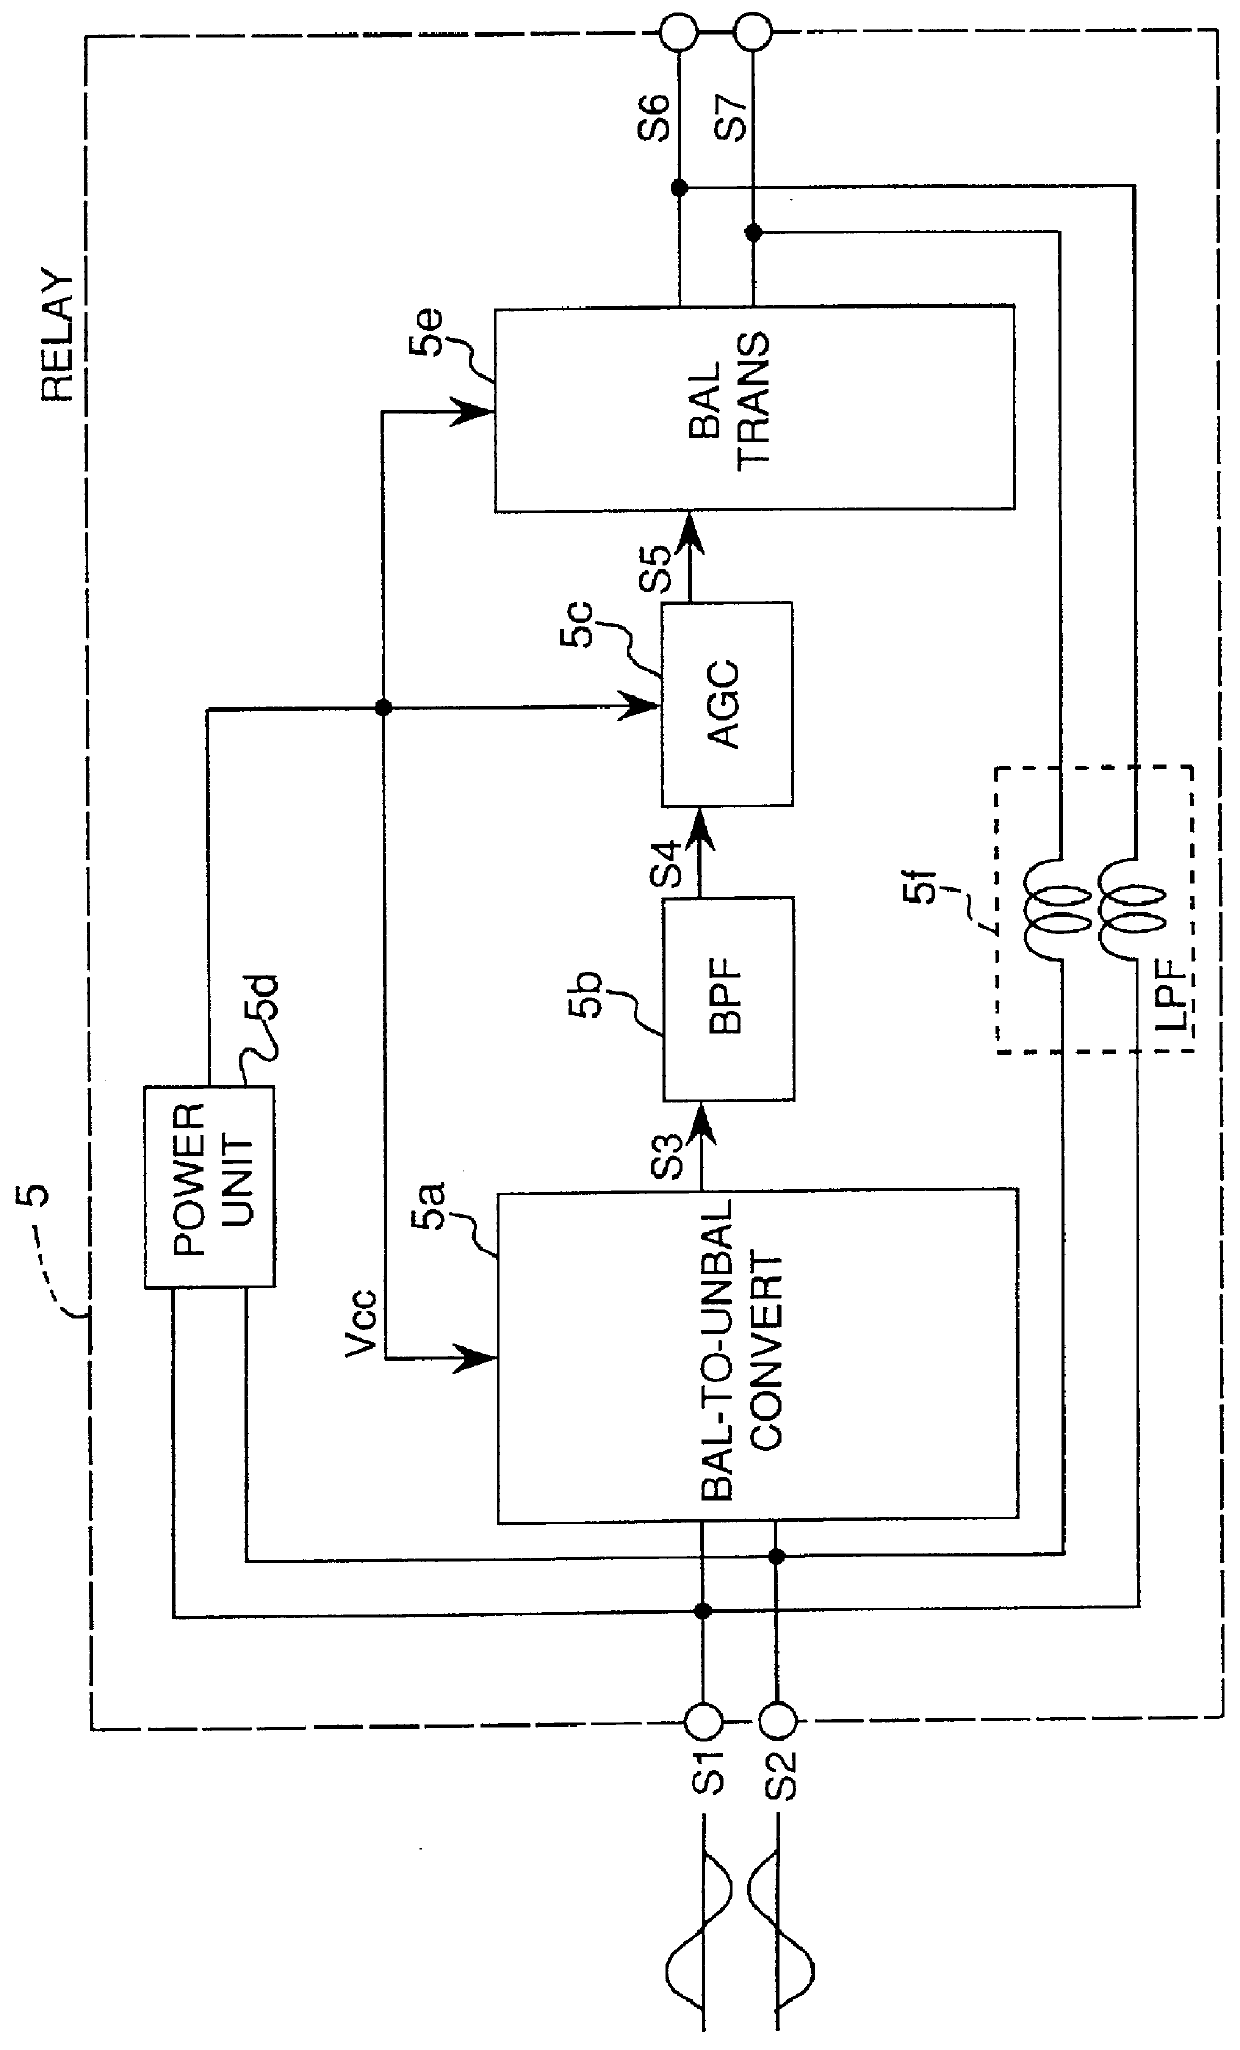 Loop detector of a branching device for a multiplexed audio-video signal transmission system